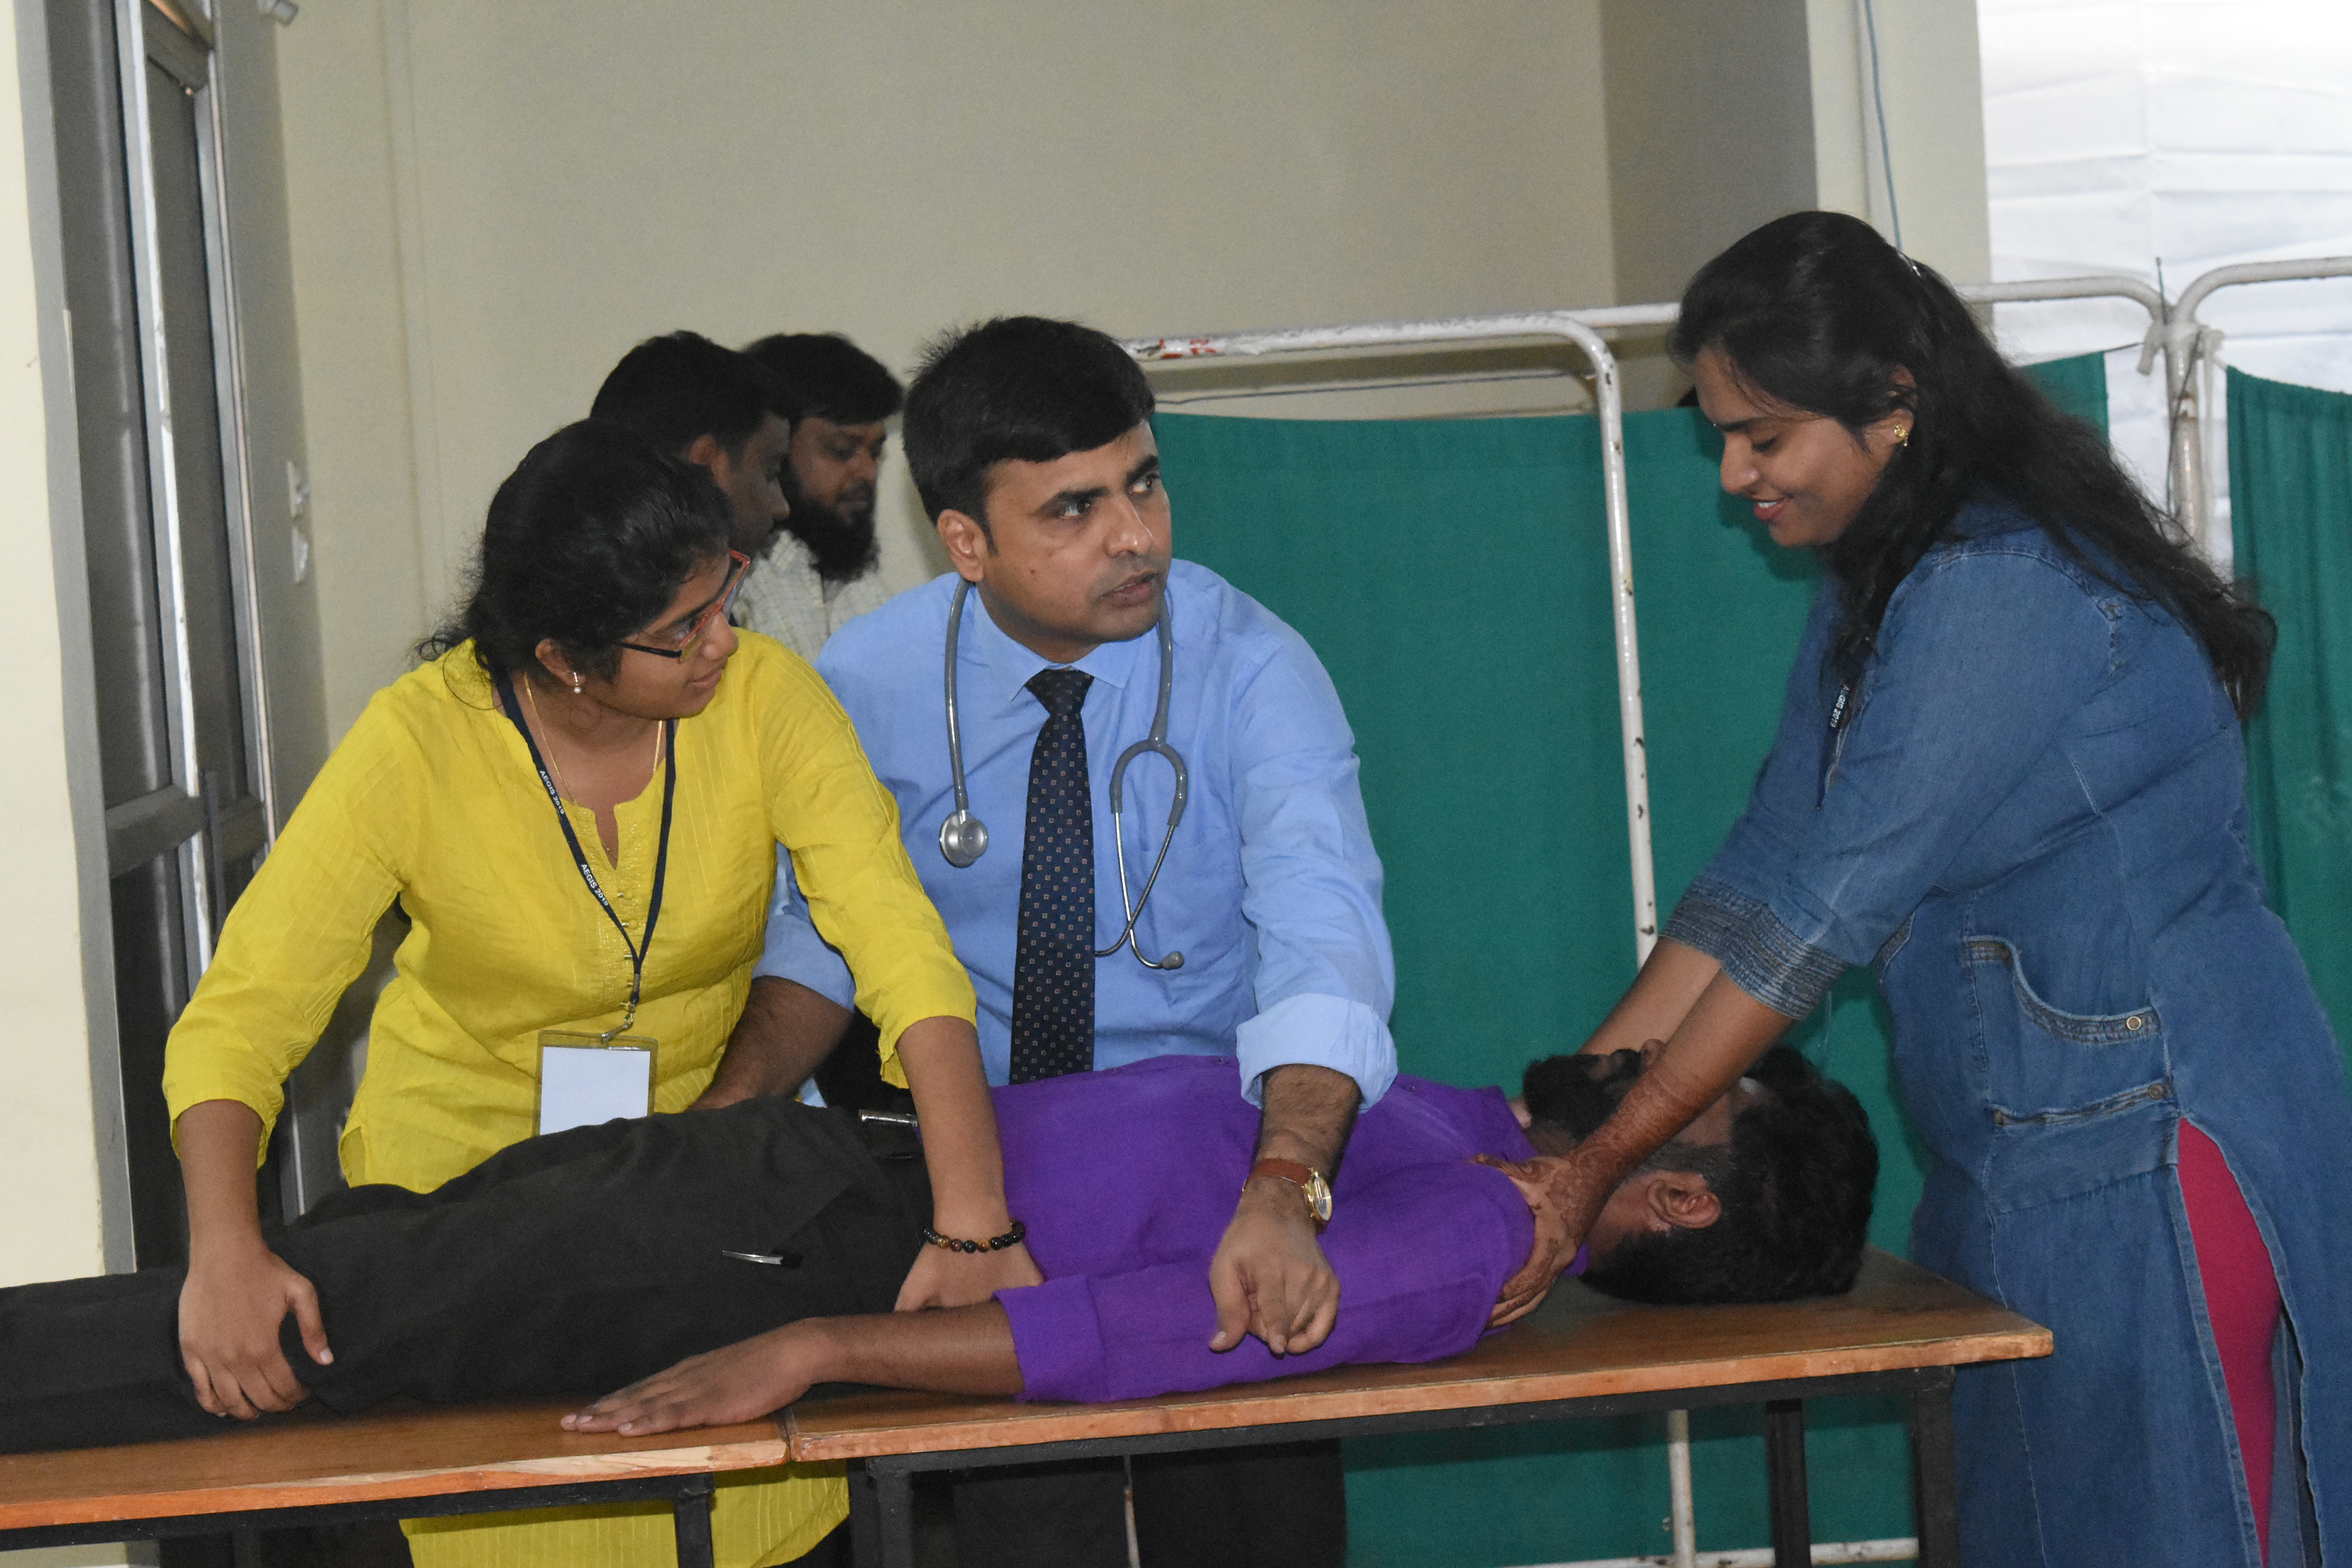 Trauma Assessment & Management work shop has held at Gandhi Medical College as part of AEGIS event. 